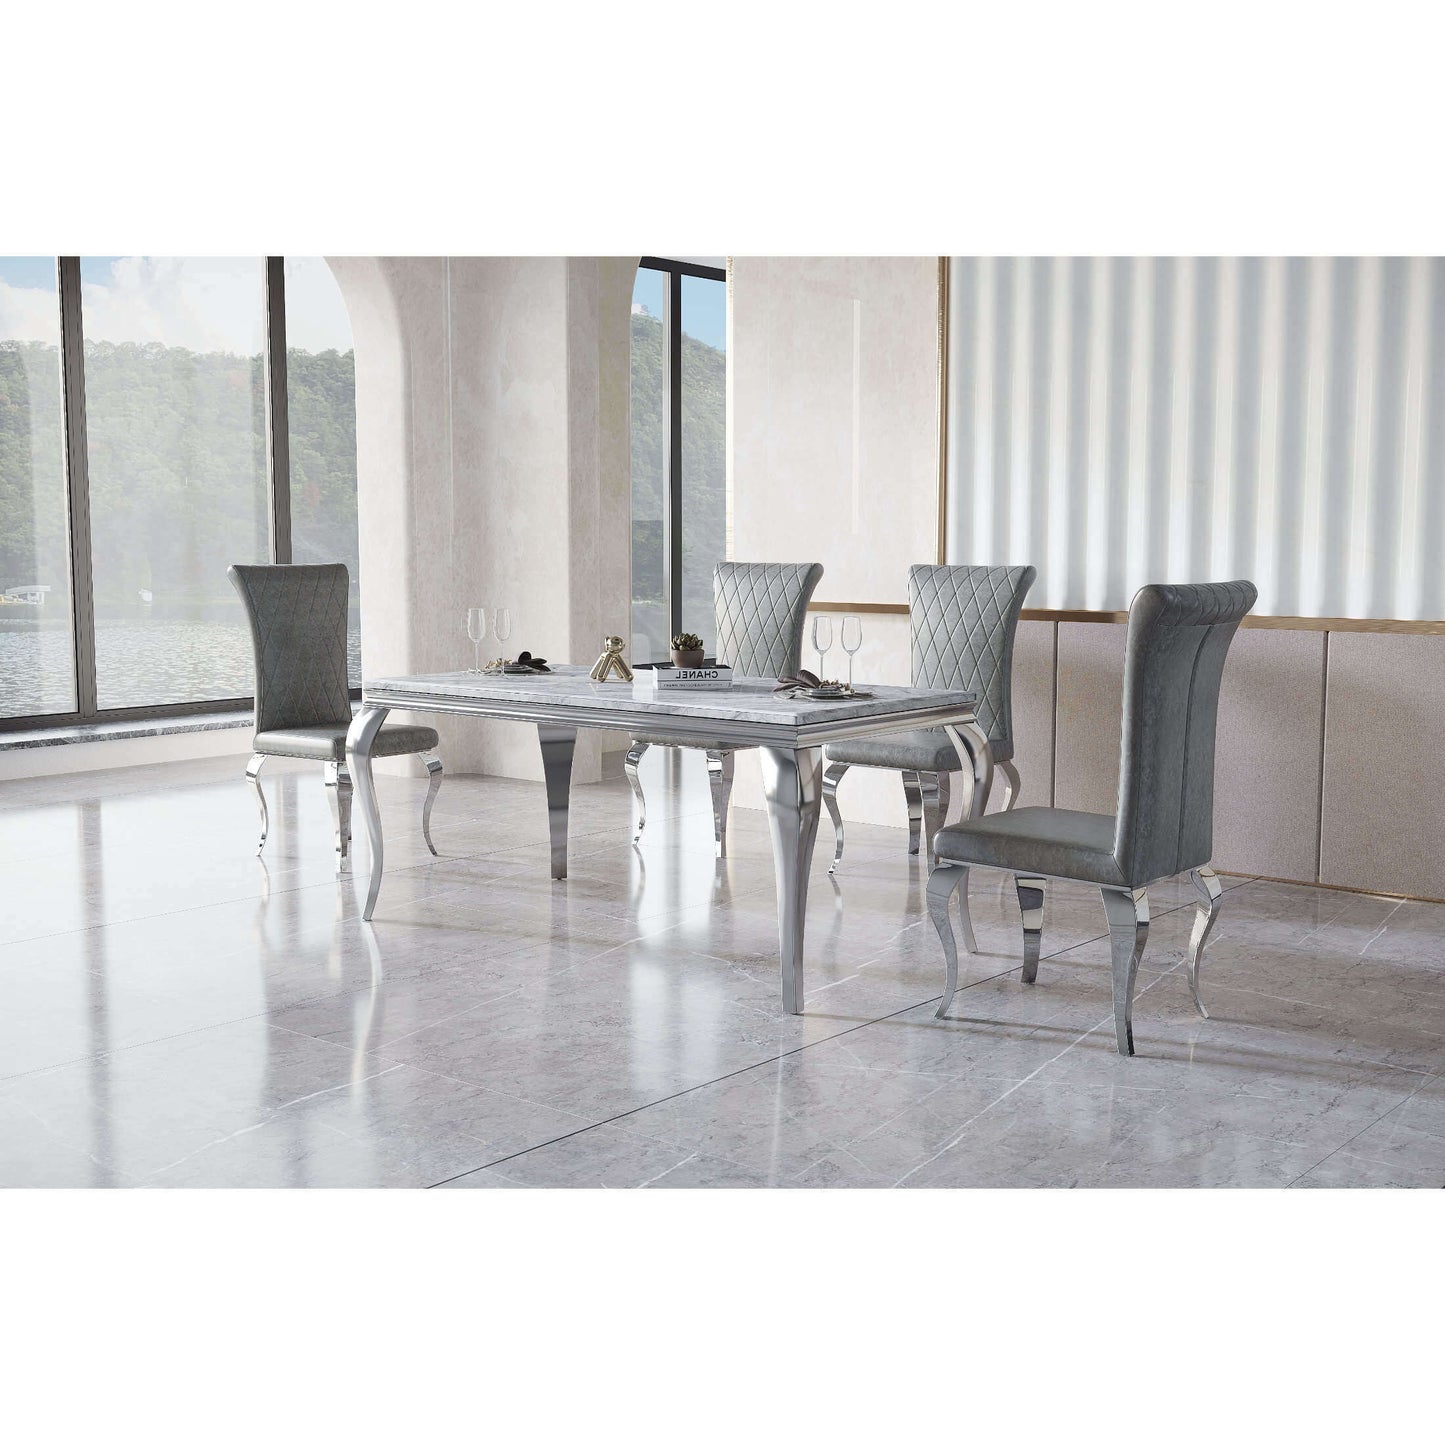 Ashpinoke:Grande Marble Dining Table with Stainless Steel Base,Premium Dining,Heartlands Furniture